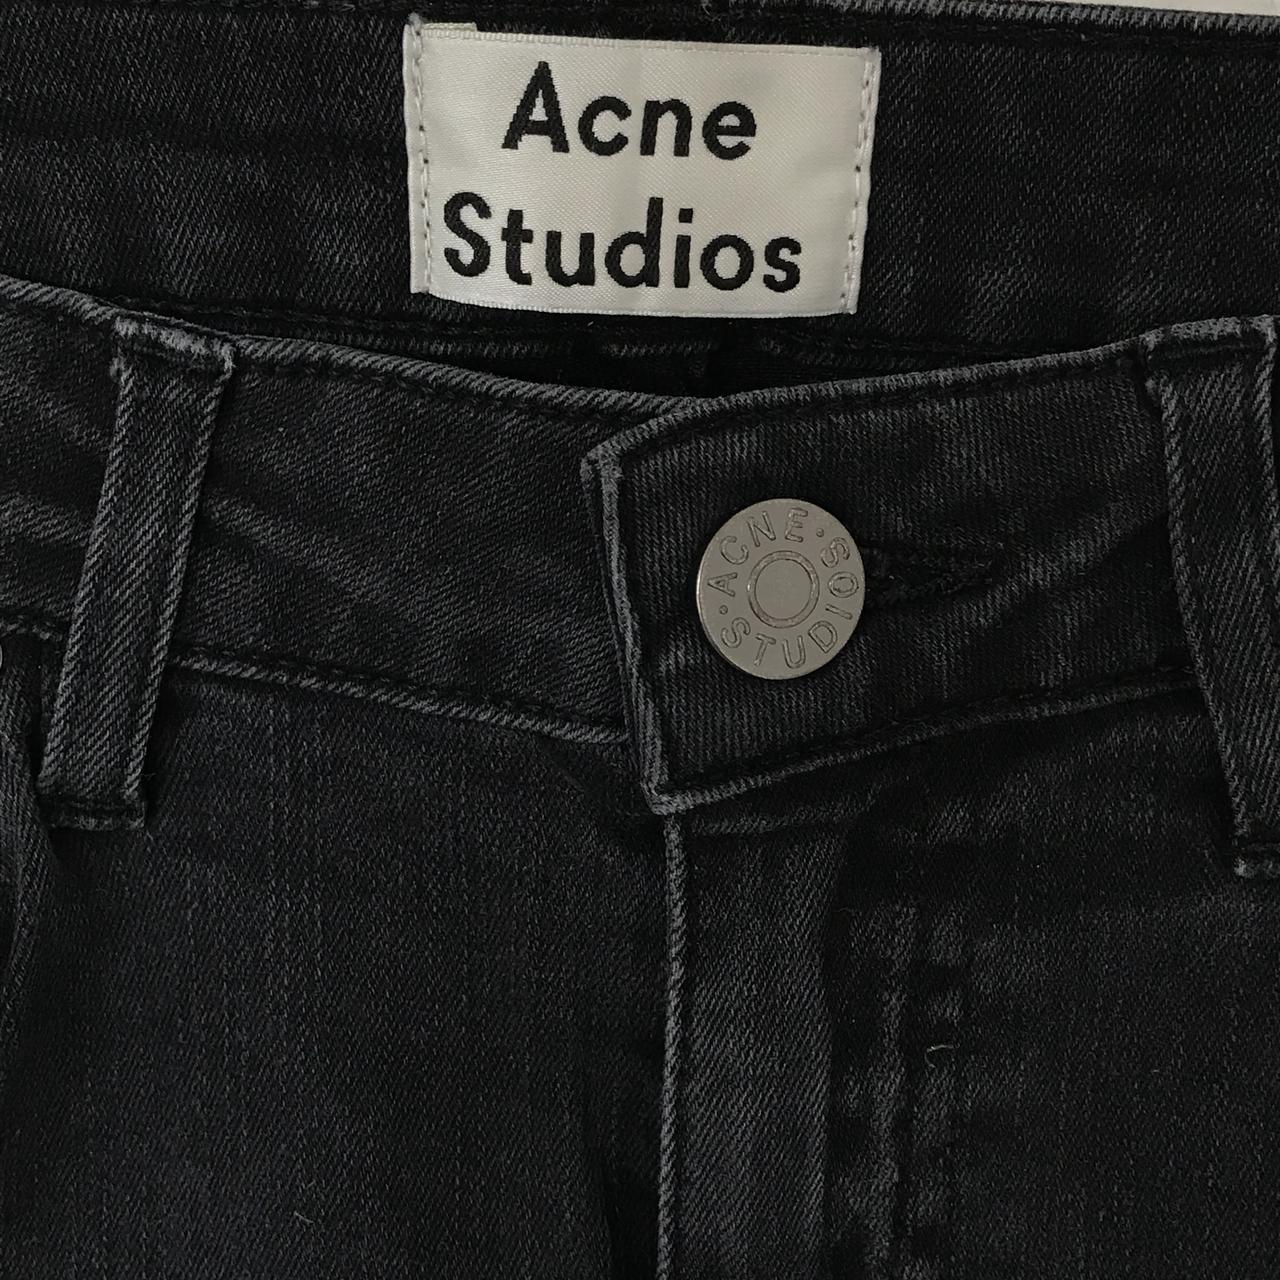 Acne Studios Skin 5 used black Jeans Features a... - Depop